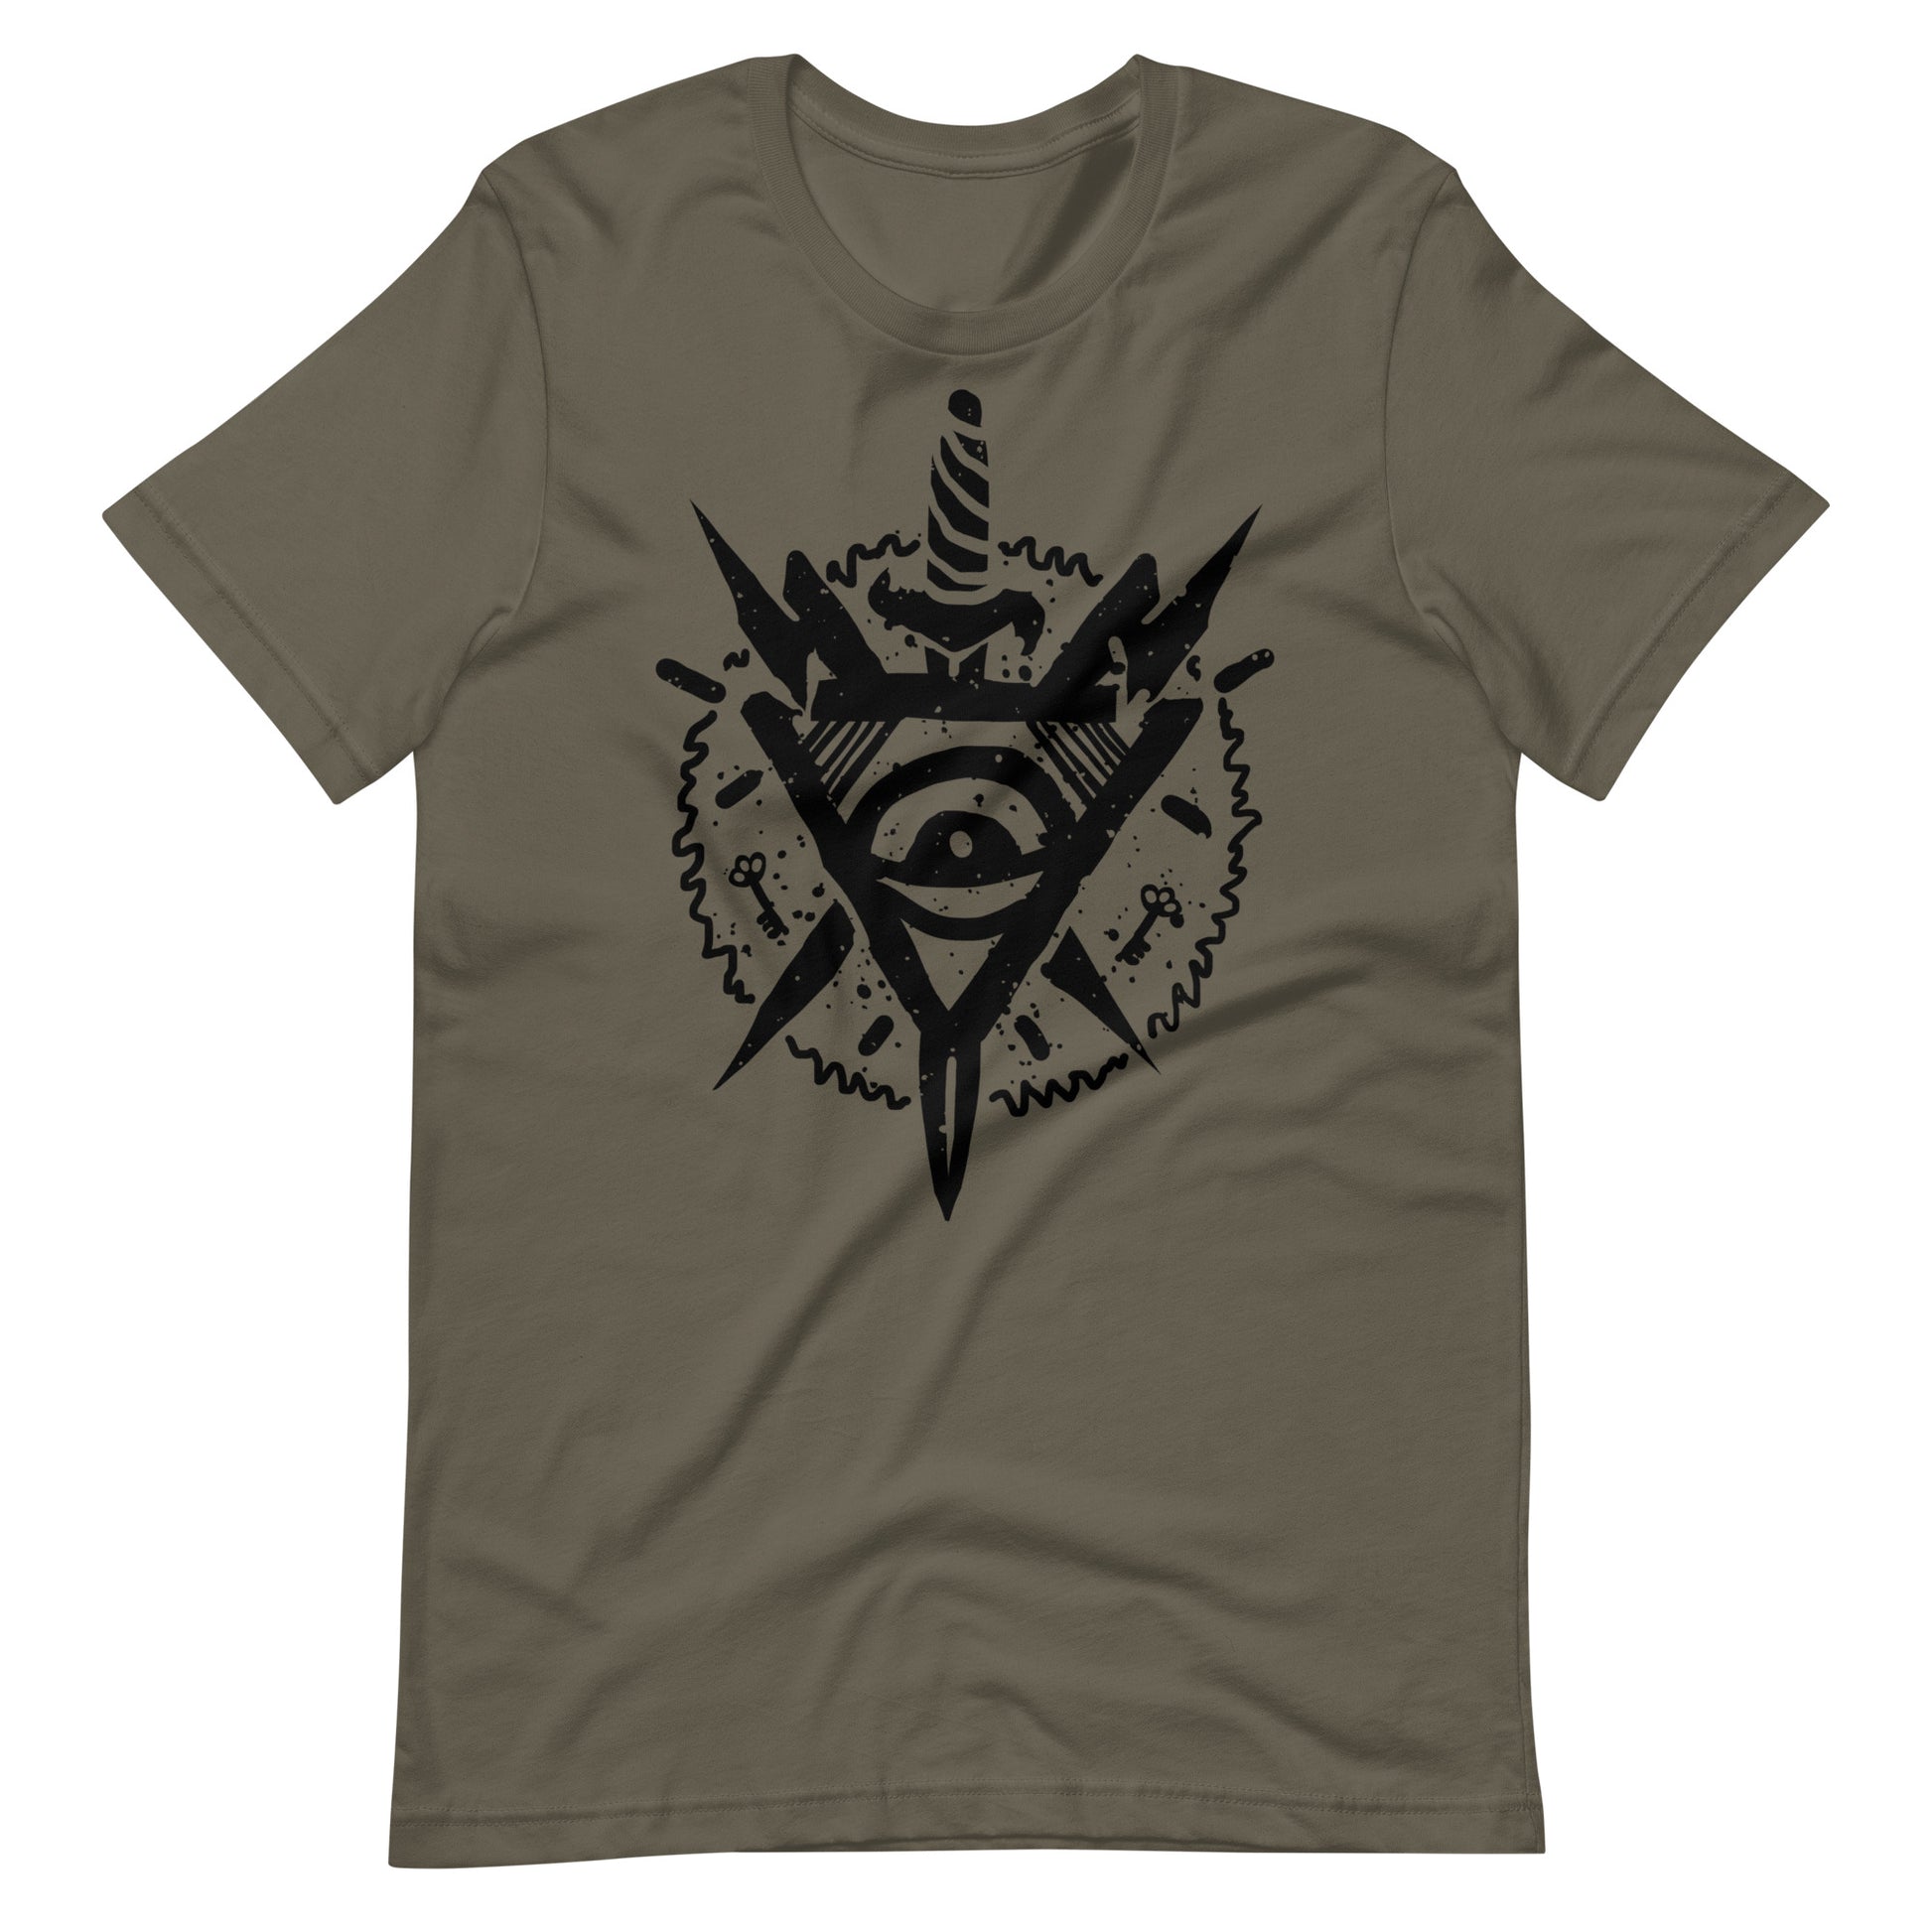 Triangle Eye Black - Men's t-shirt - Army Front